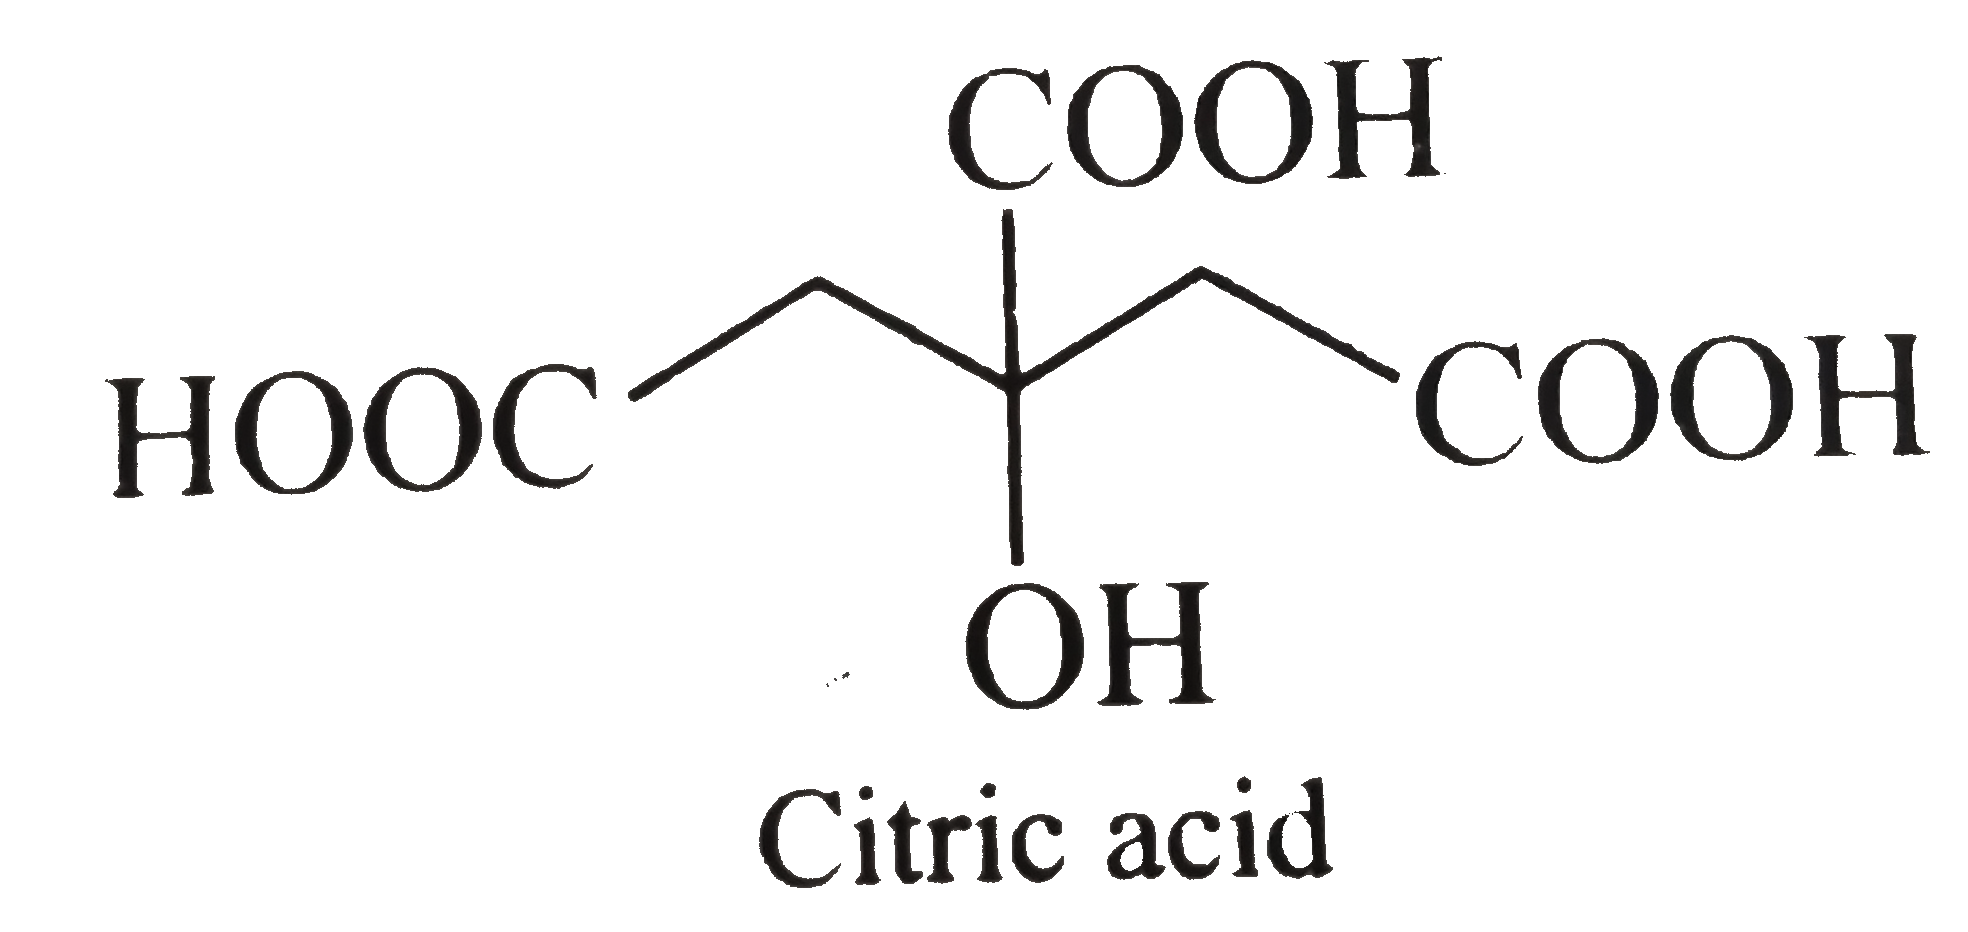 Assertion (A) : The IUPAC name of the citric acid is 2-hydroxy-propane-1,2,3-tricarboxylic acid   Reason (R ): When an unbranched C atom directly linked to more than two like-functional groups, then it is named as a dervative of the parent alkane which does not include the C of the functional groups.